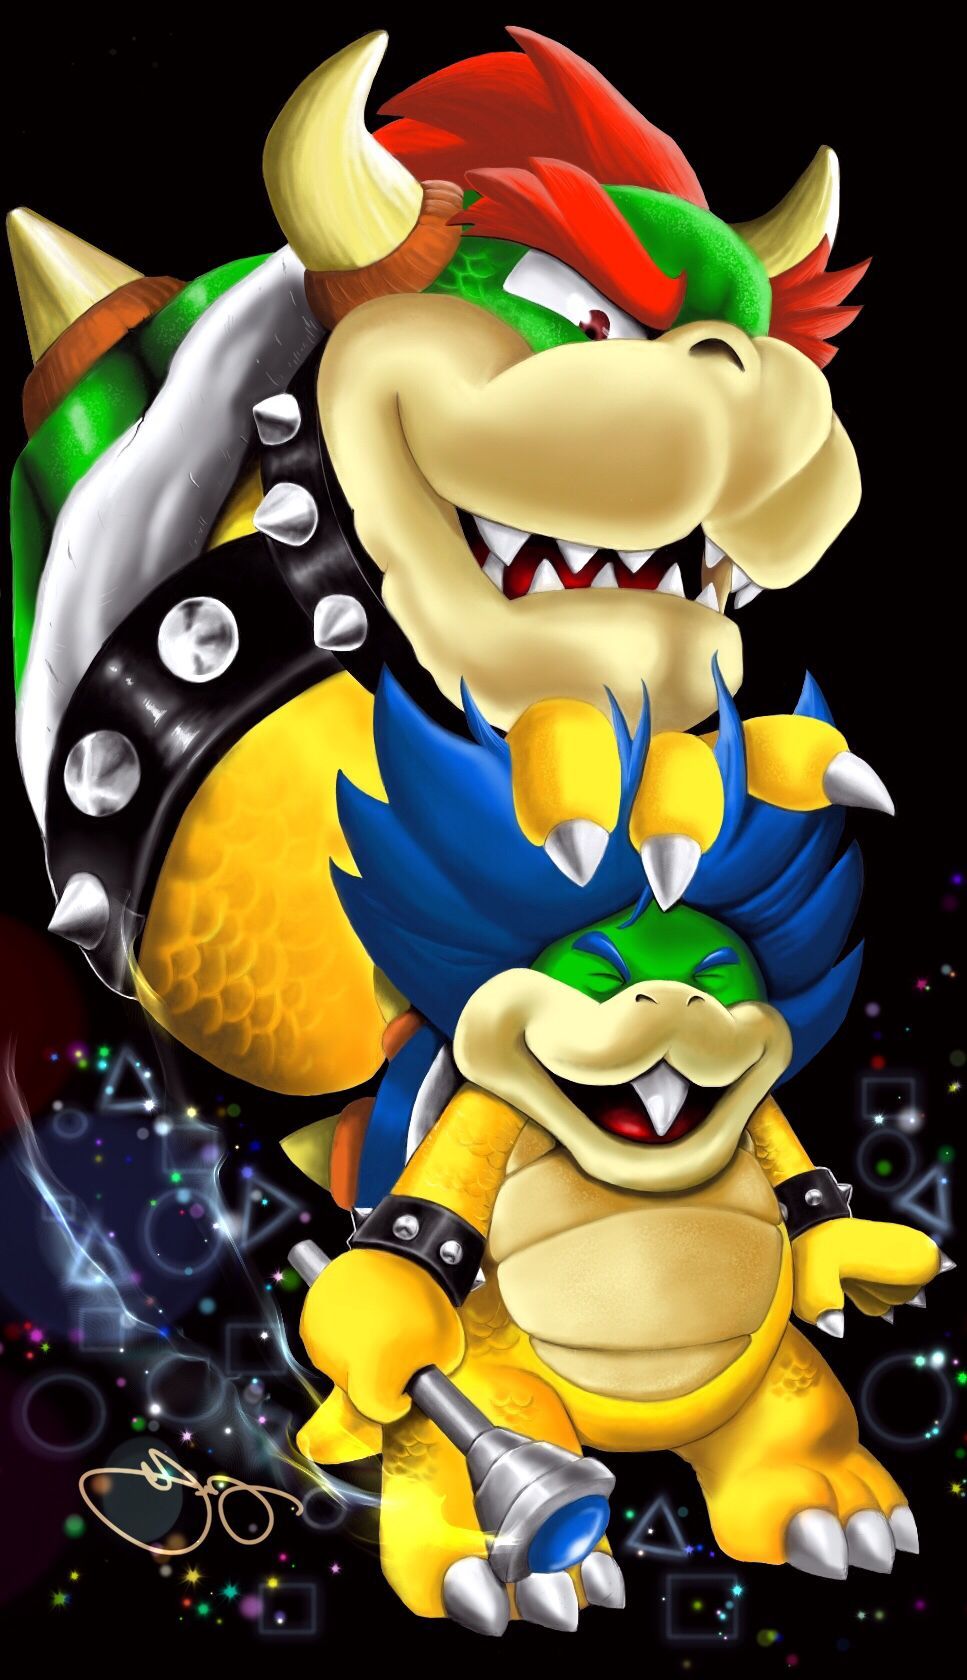 Chip Off The Old Block: Bowser & Ludwig Von Koopa